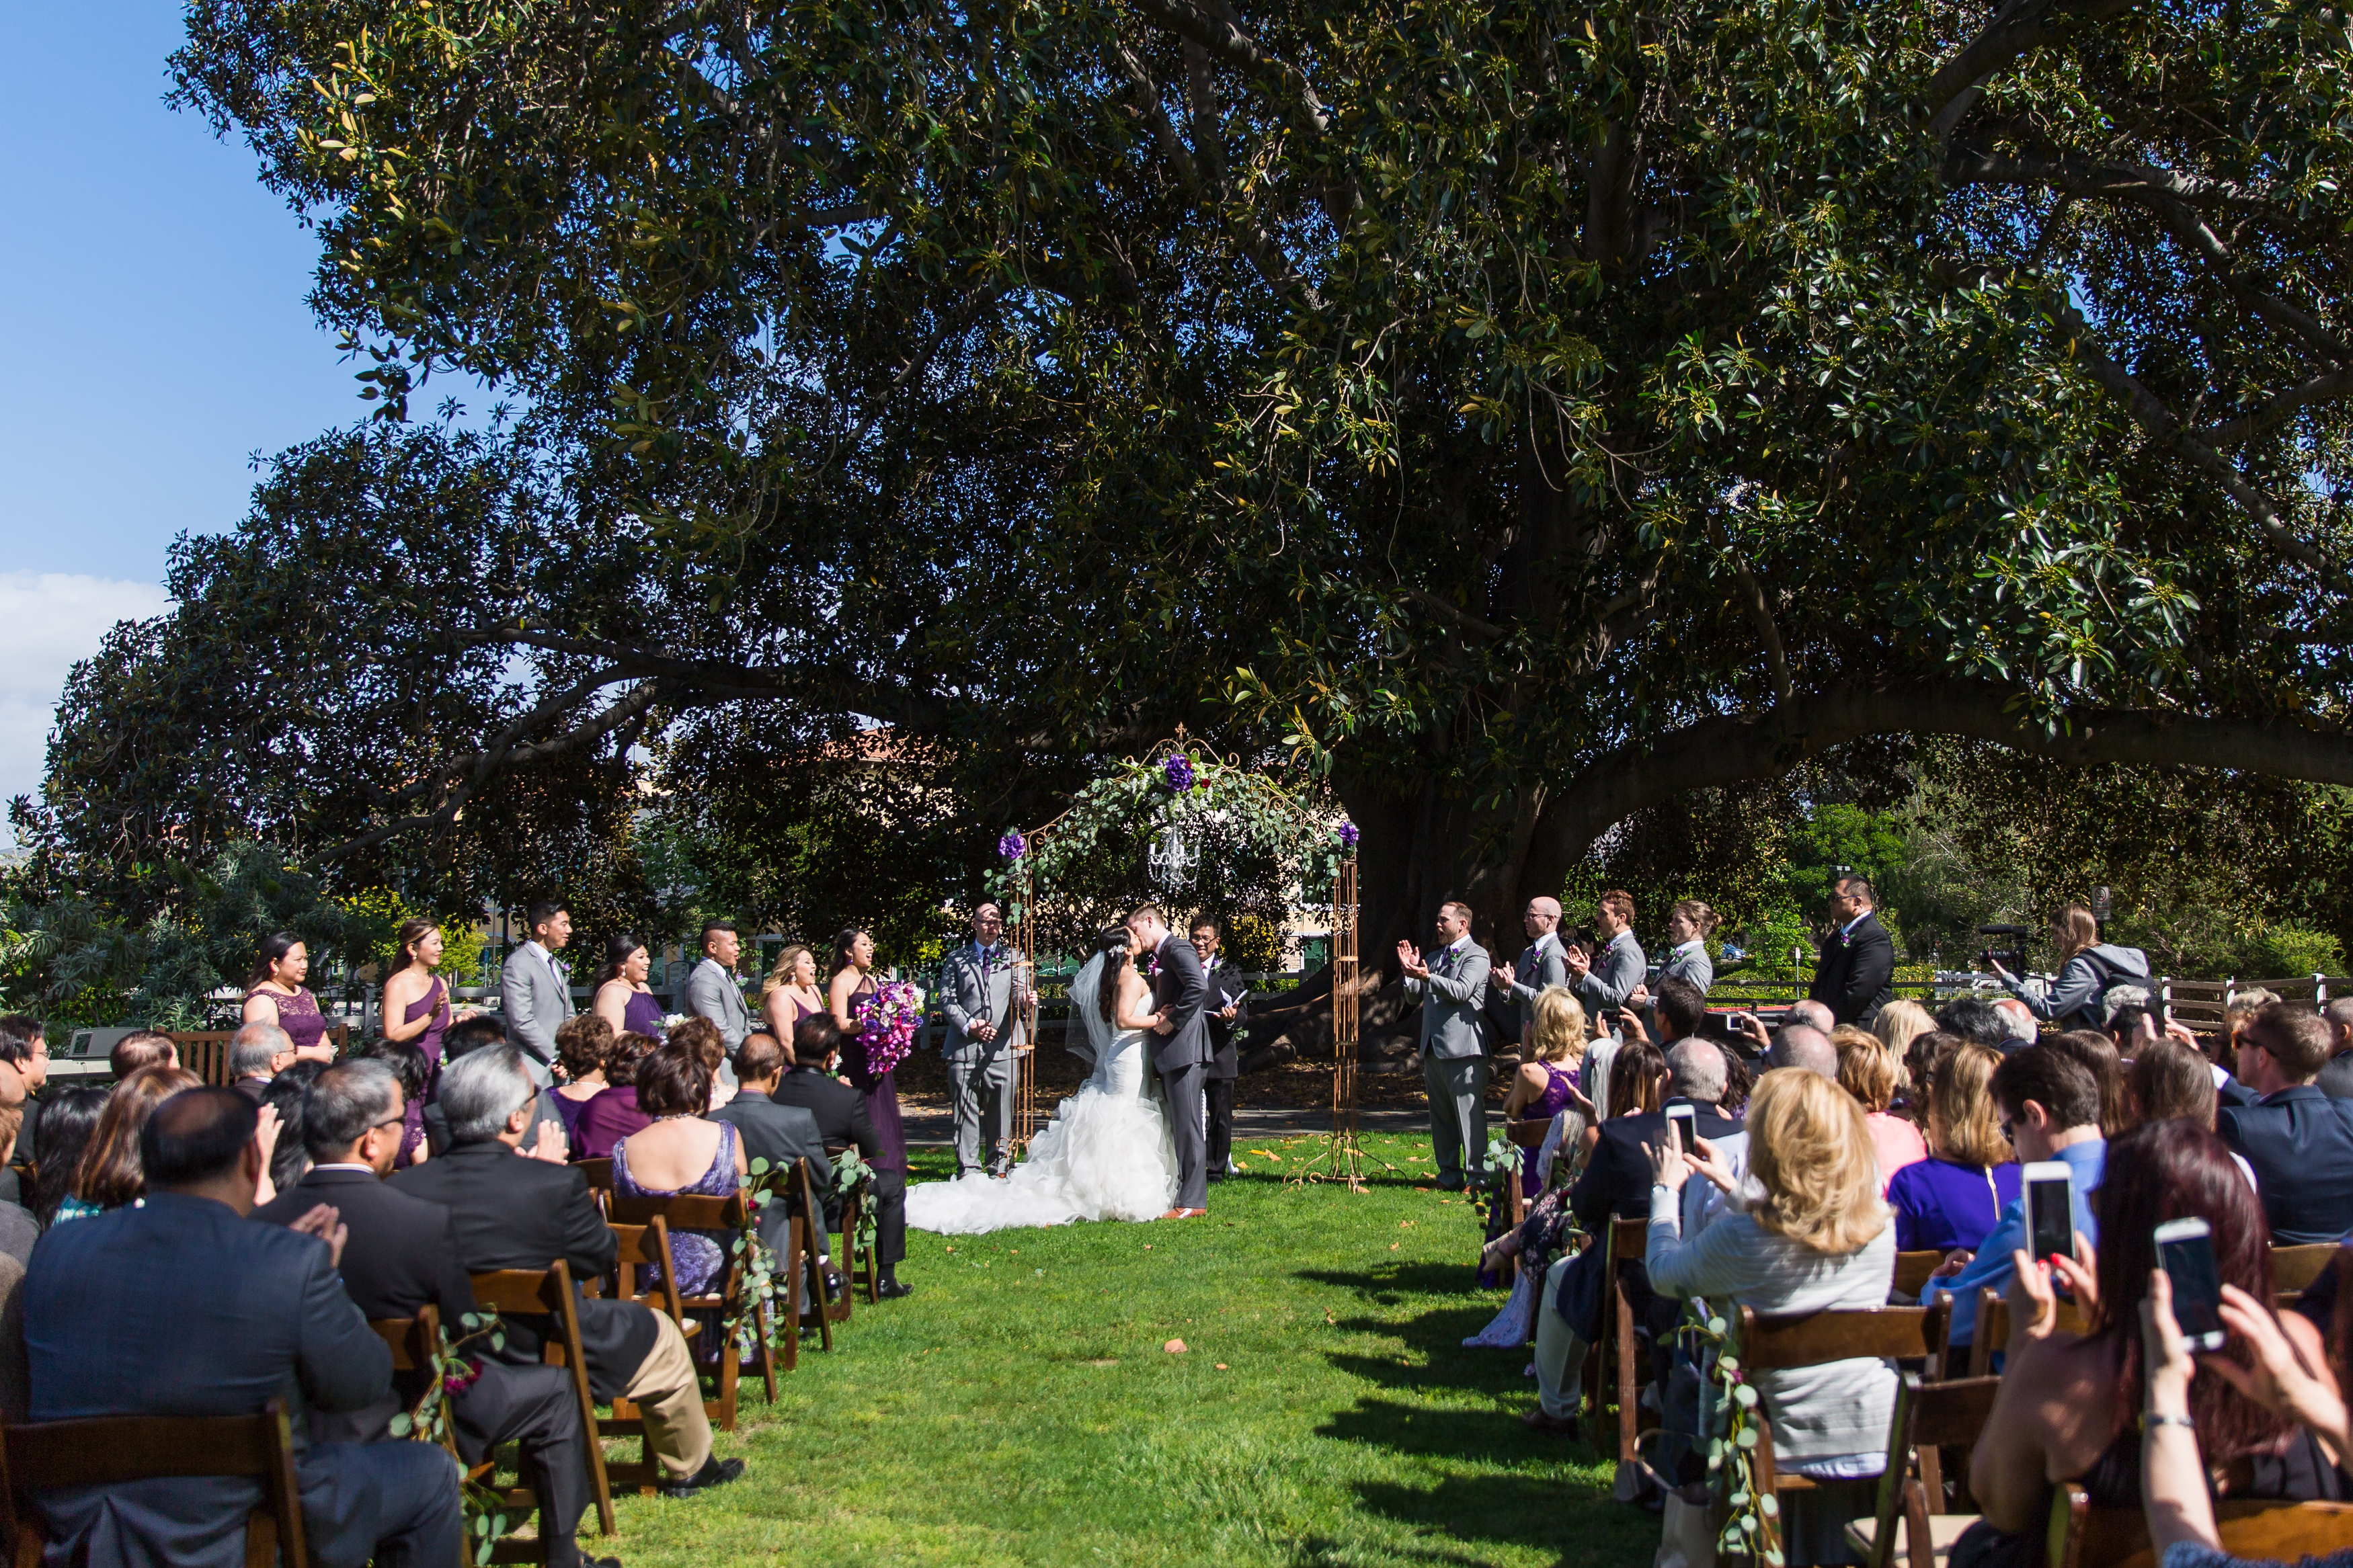 Couple's first kiss during outdoor ceremony at altar